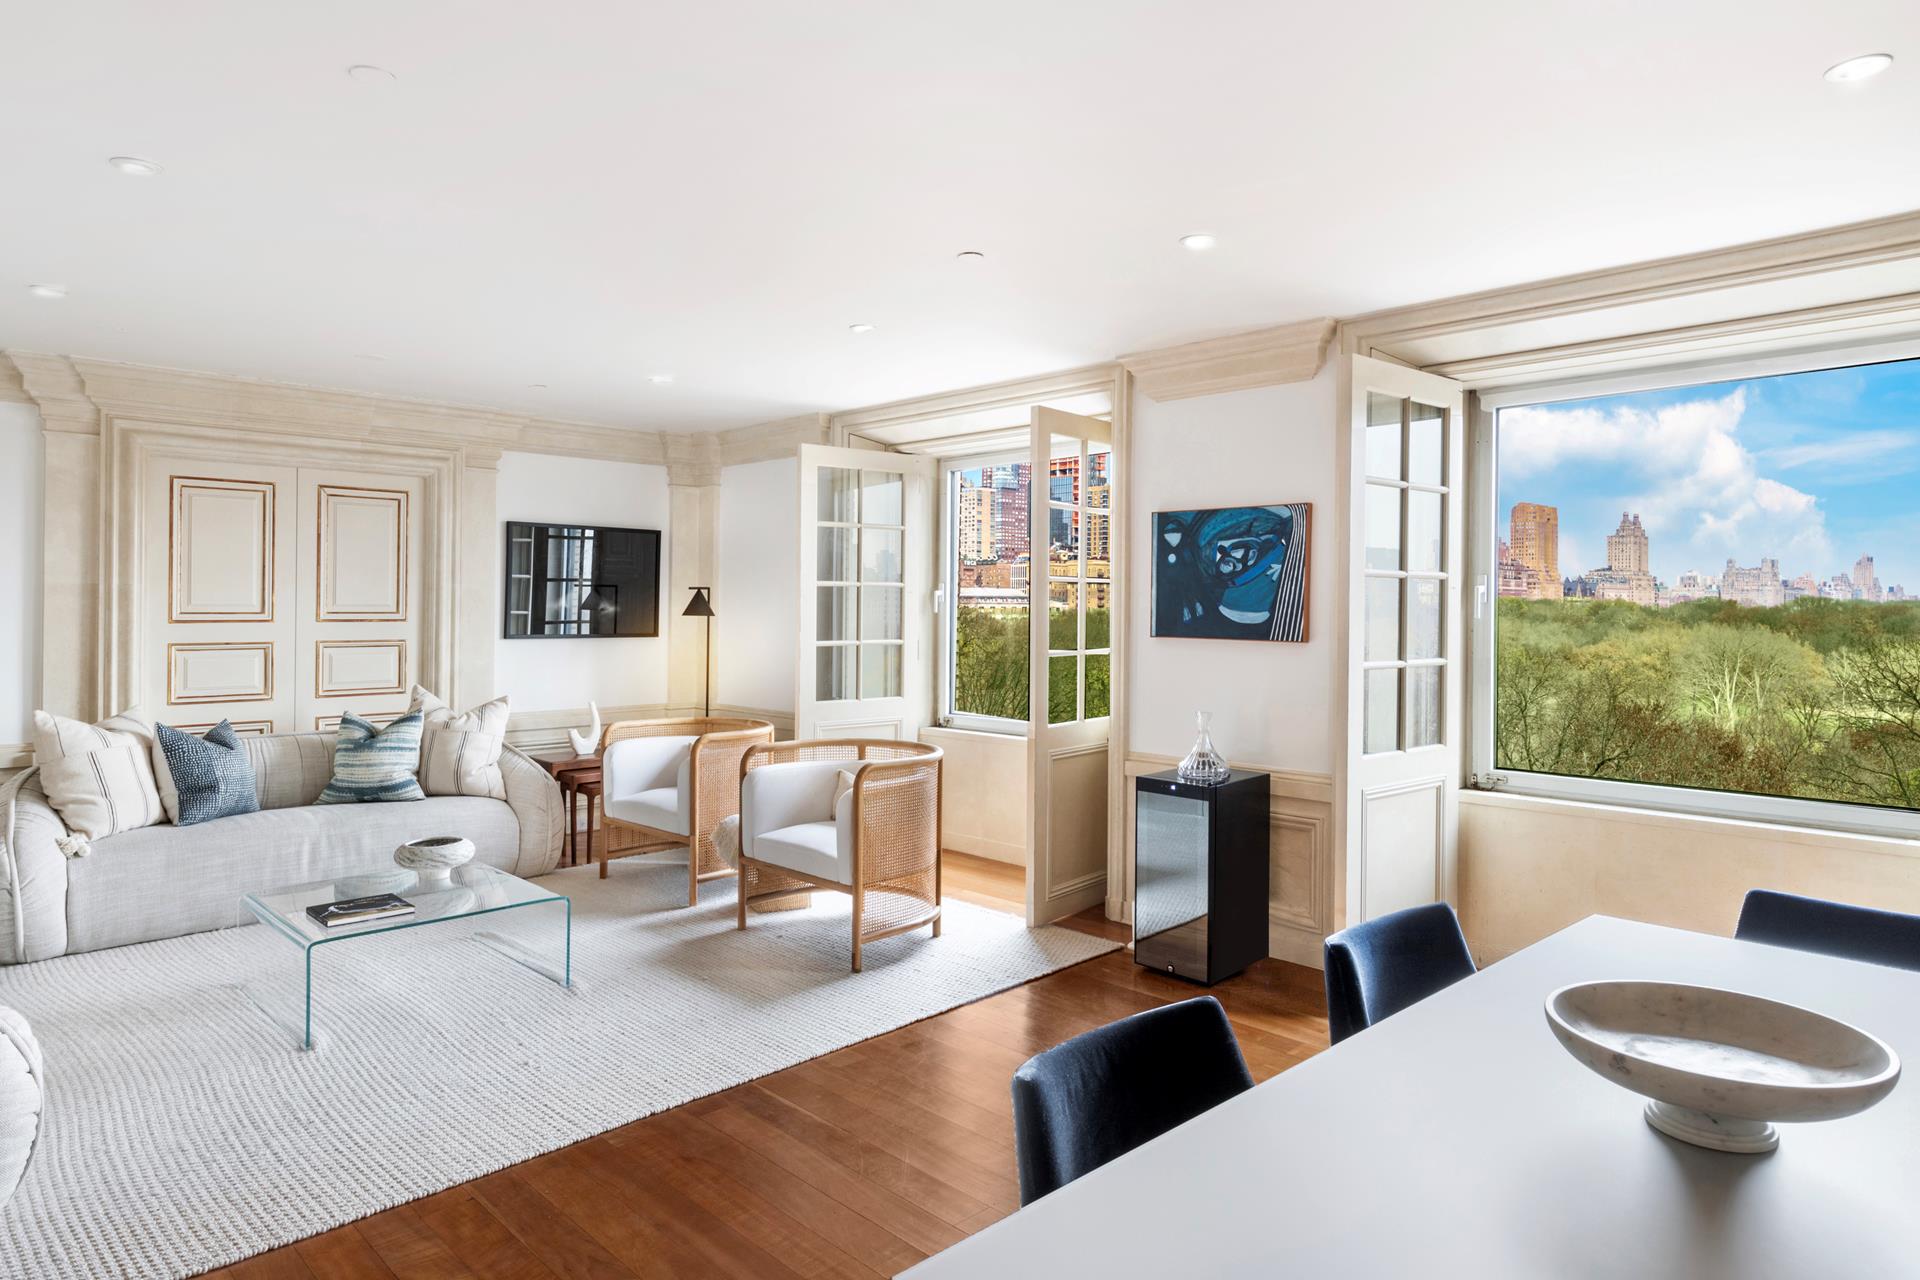 160 Central Park 915, Central Park South, Midtown West, NYC - 3 Bedrooms  
2.5 Bathrooms  
77 Rooms - 